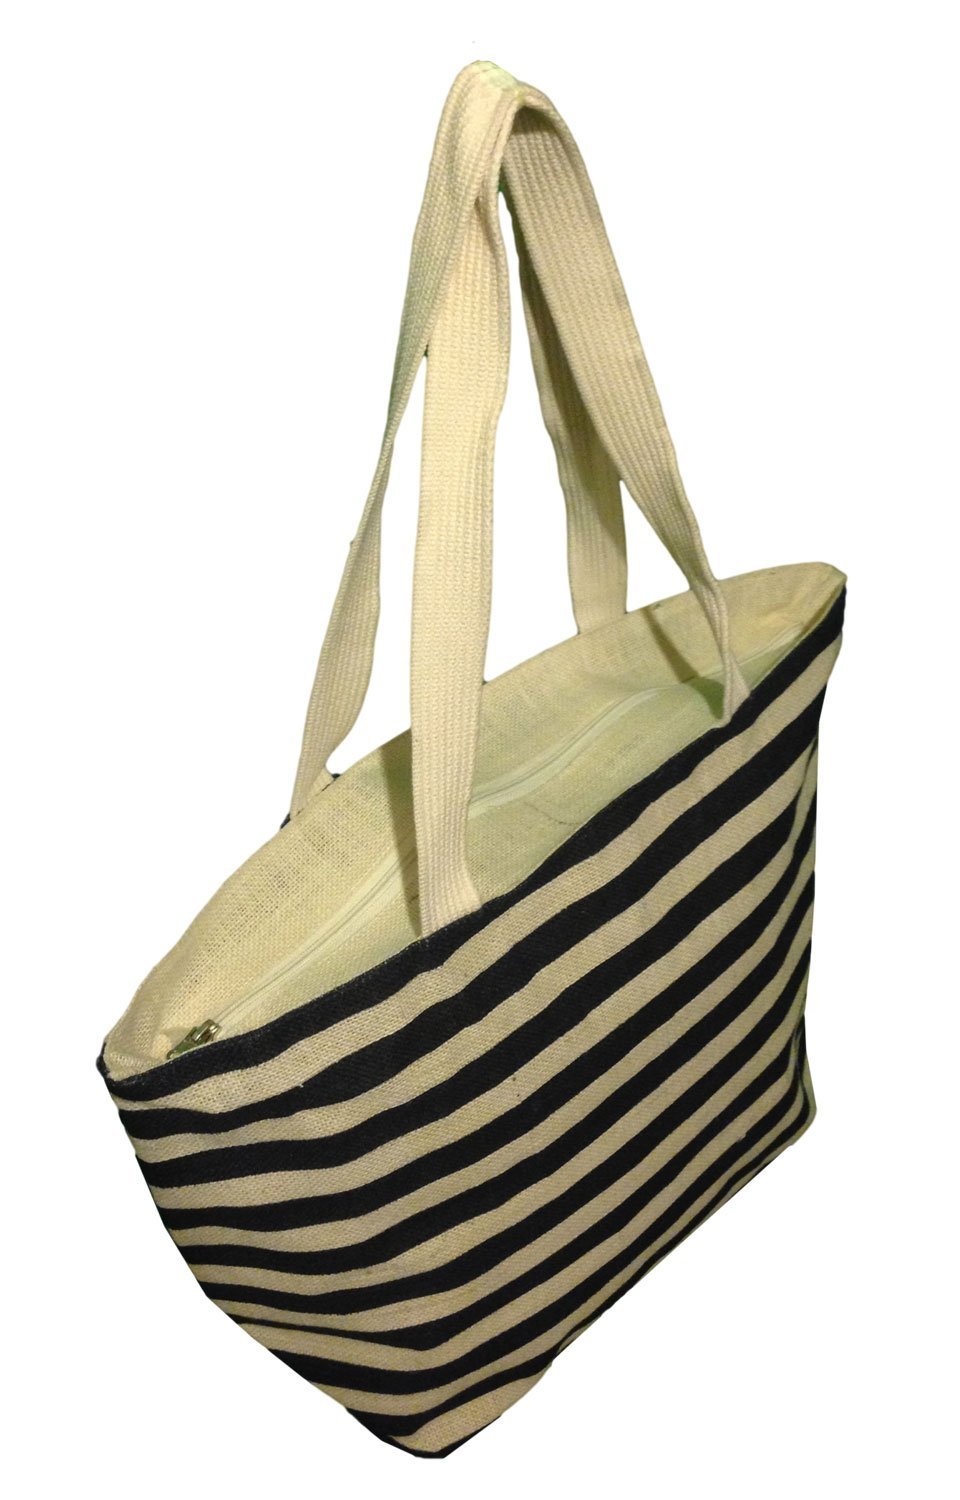 Burlap Beach Bag with Stripes Ivory/Navy 21"x13.5'x5.5" - Click Image to Close